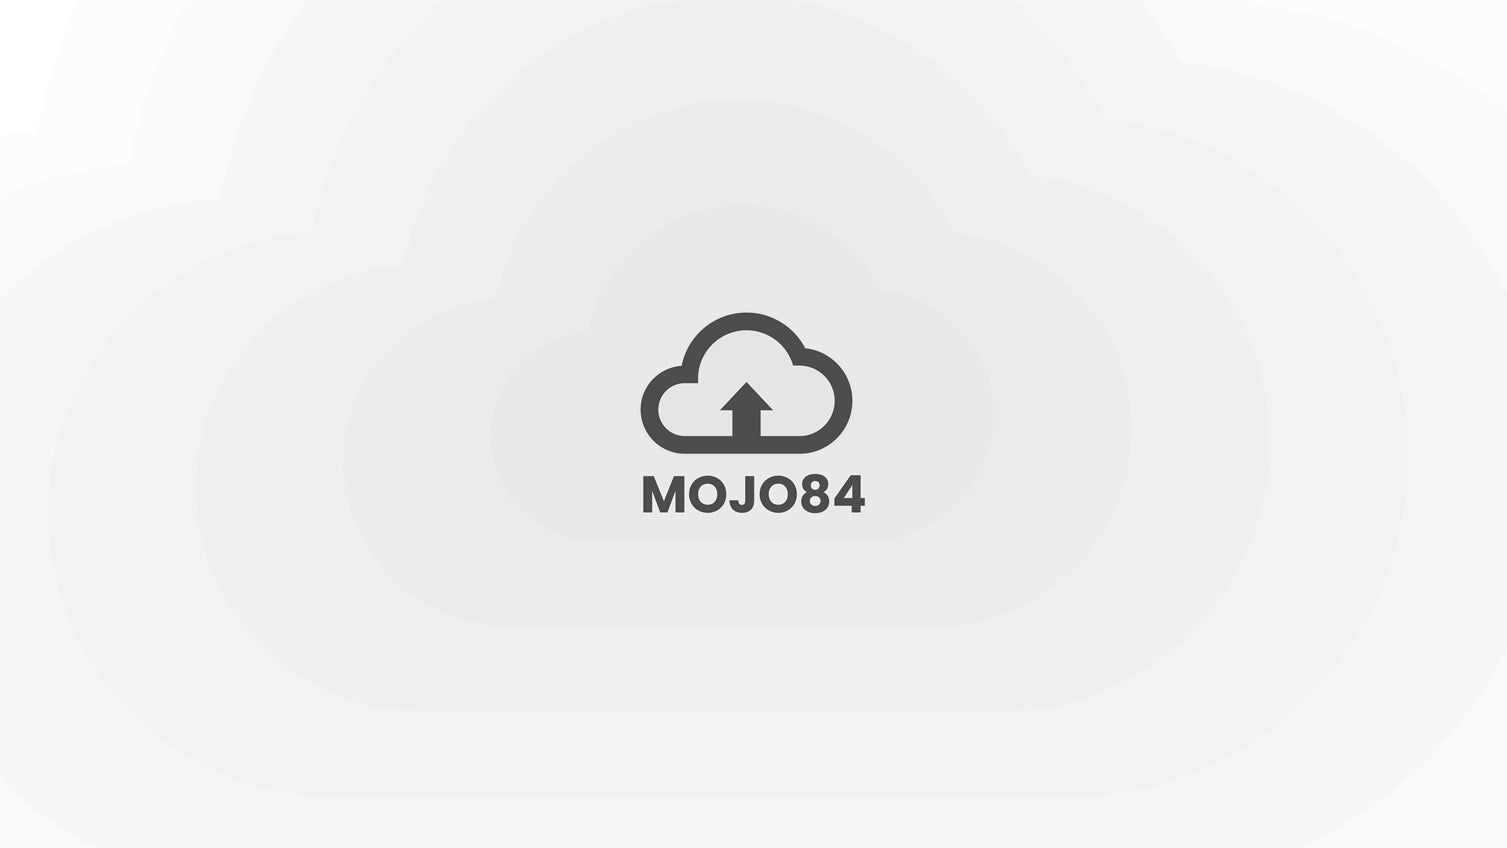 How to upgrade the firmware of Mojo84